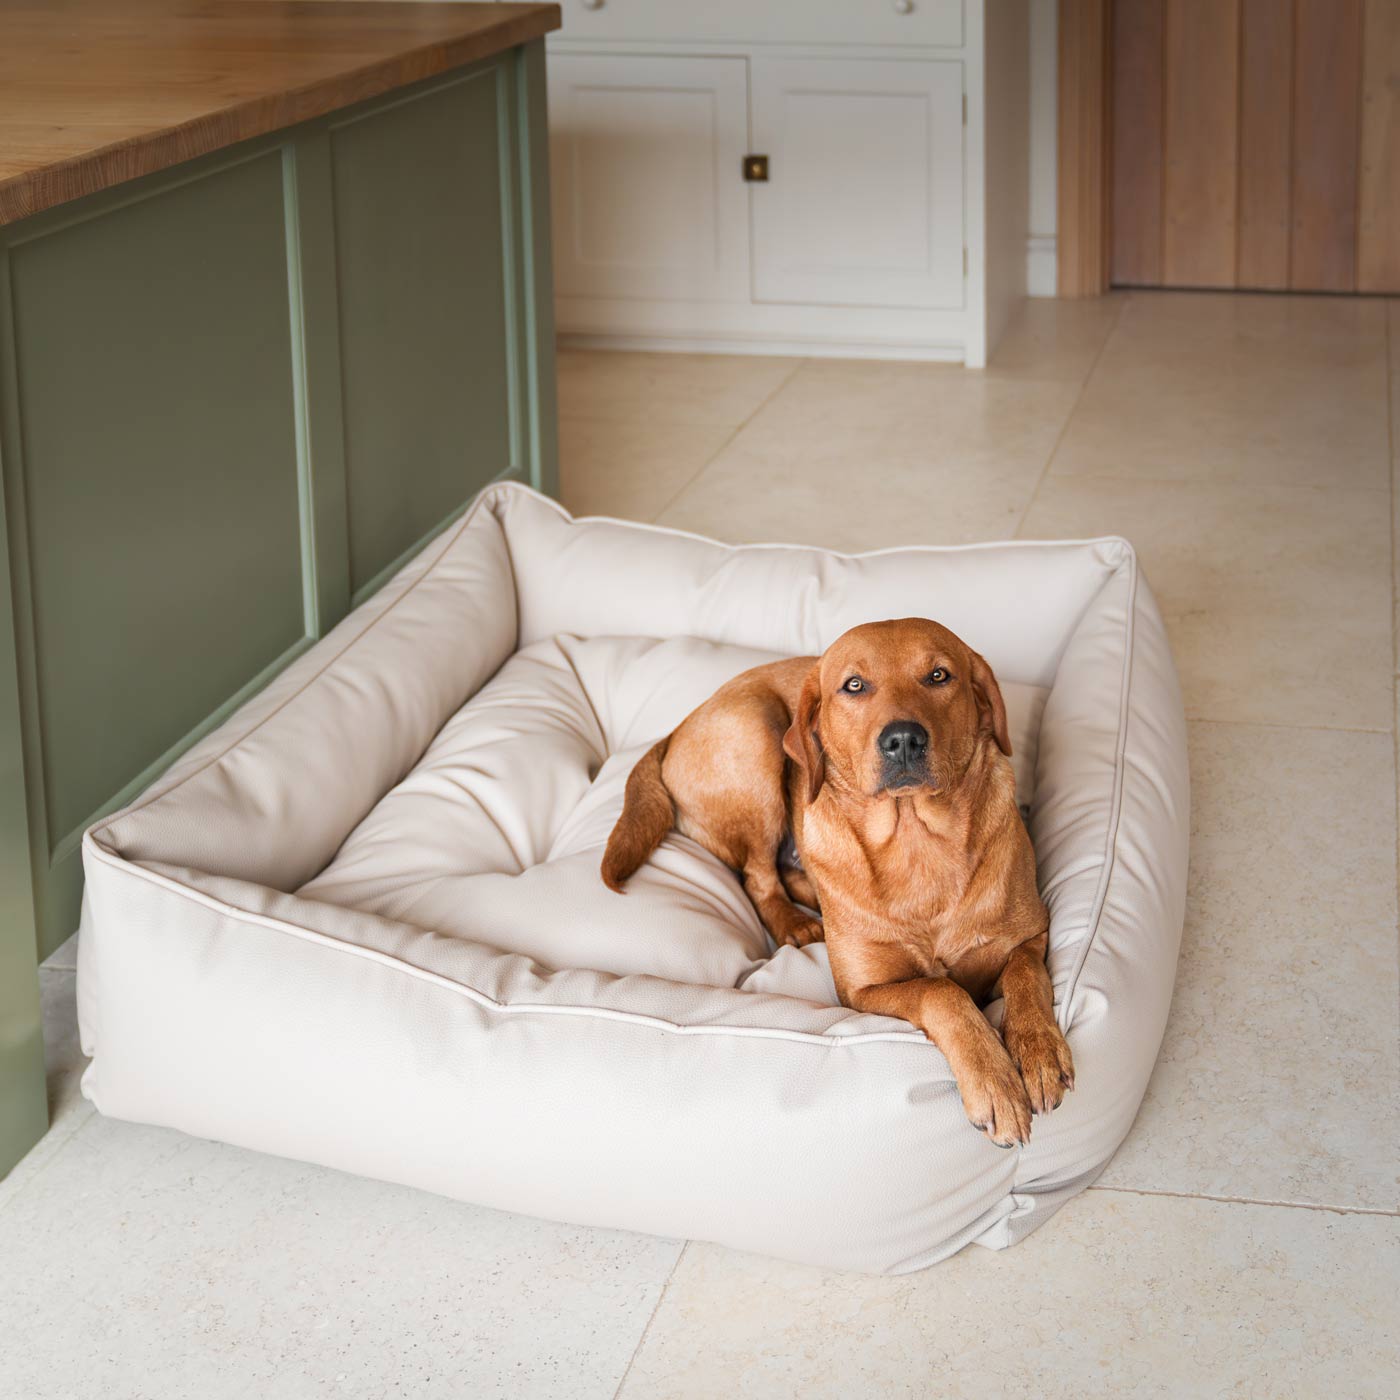 Luxury Handmade Box Bed in Rhino Tough Faux Leather, in Sand, Perfect For Your Pets Nap Time! Available To Personalise at Lords & Labradors